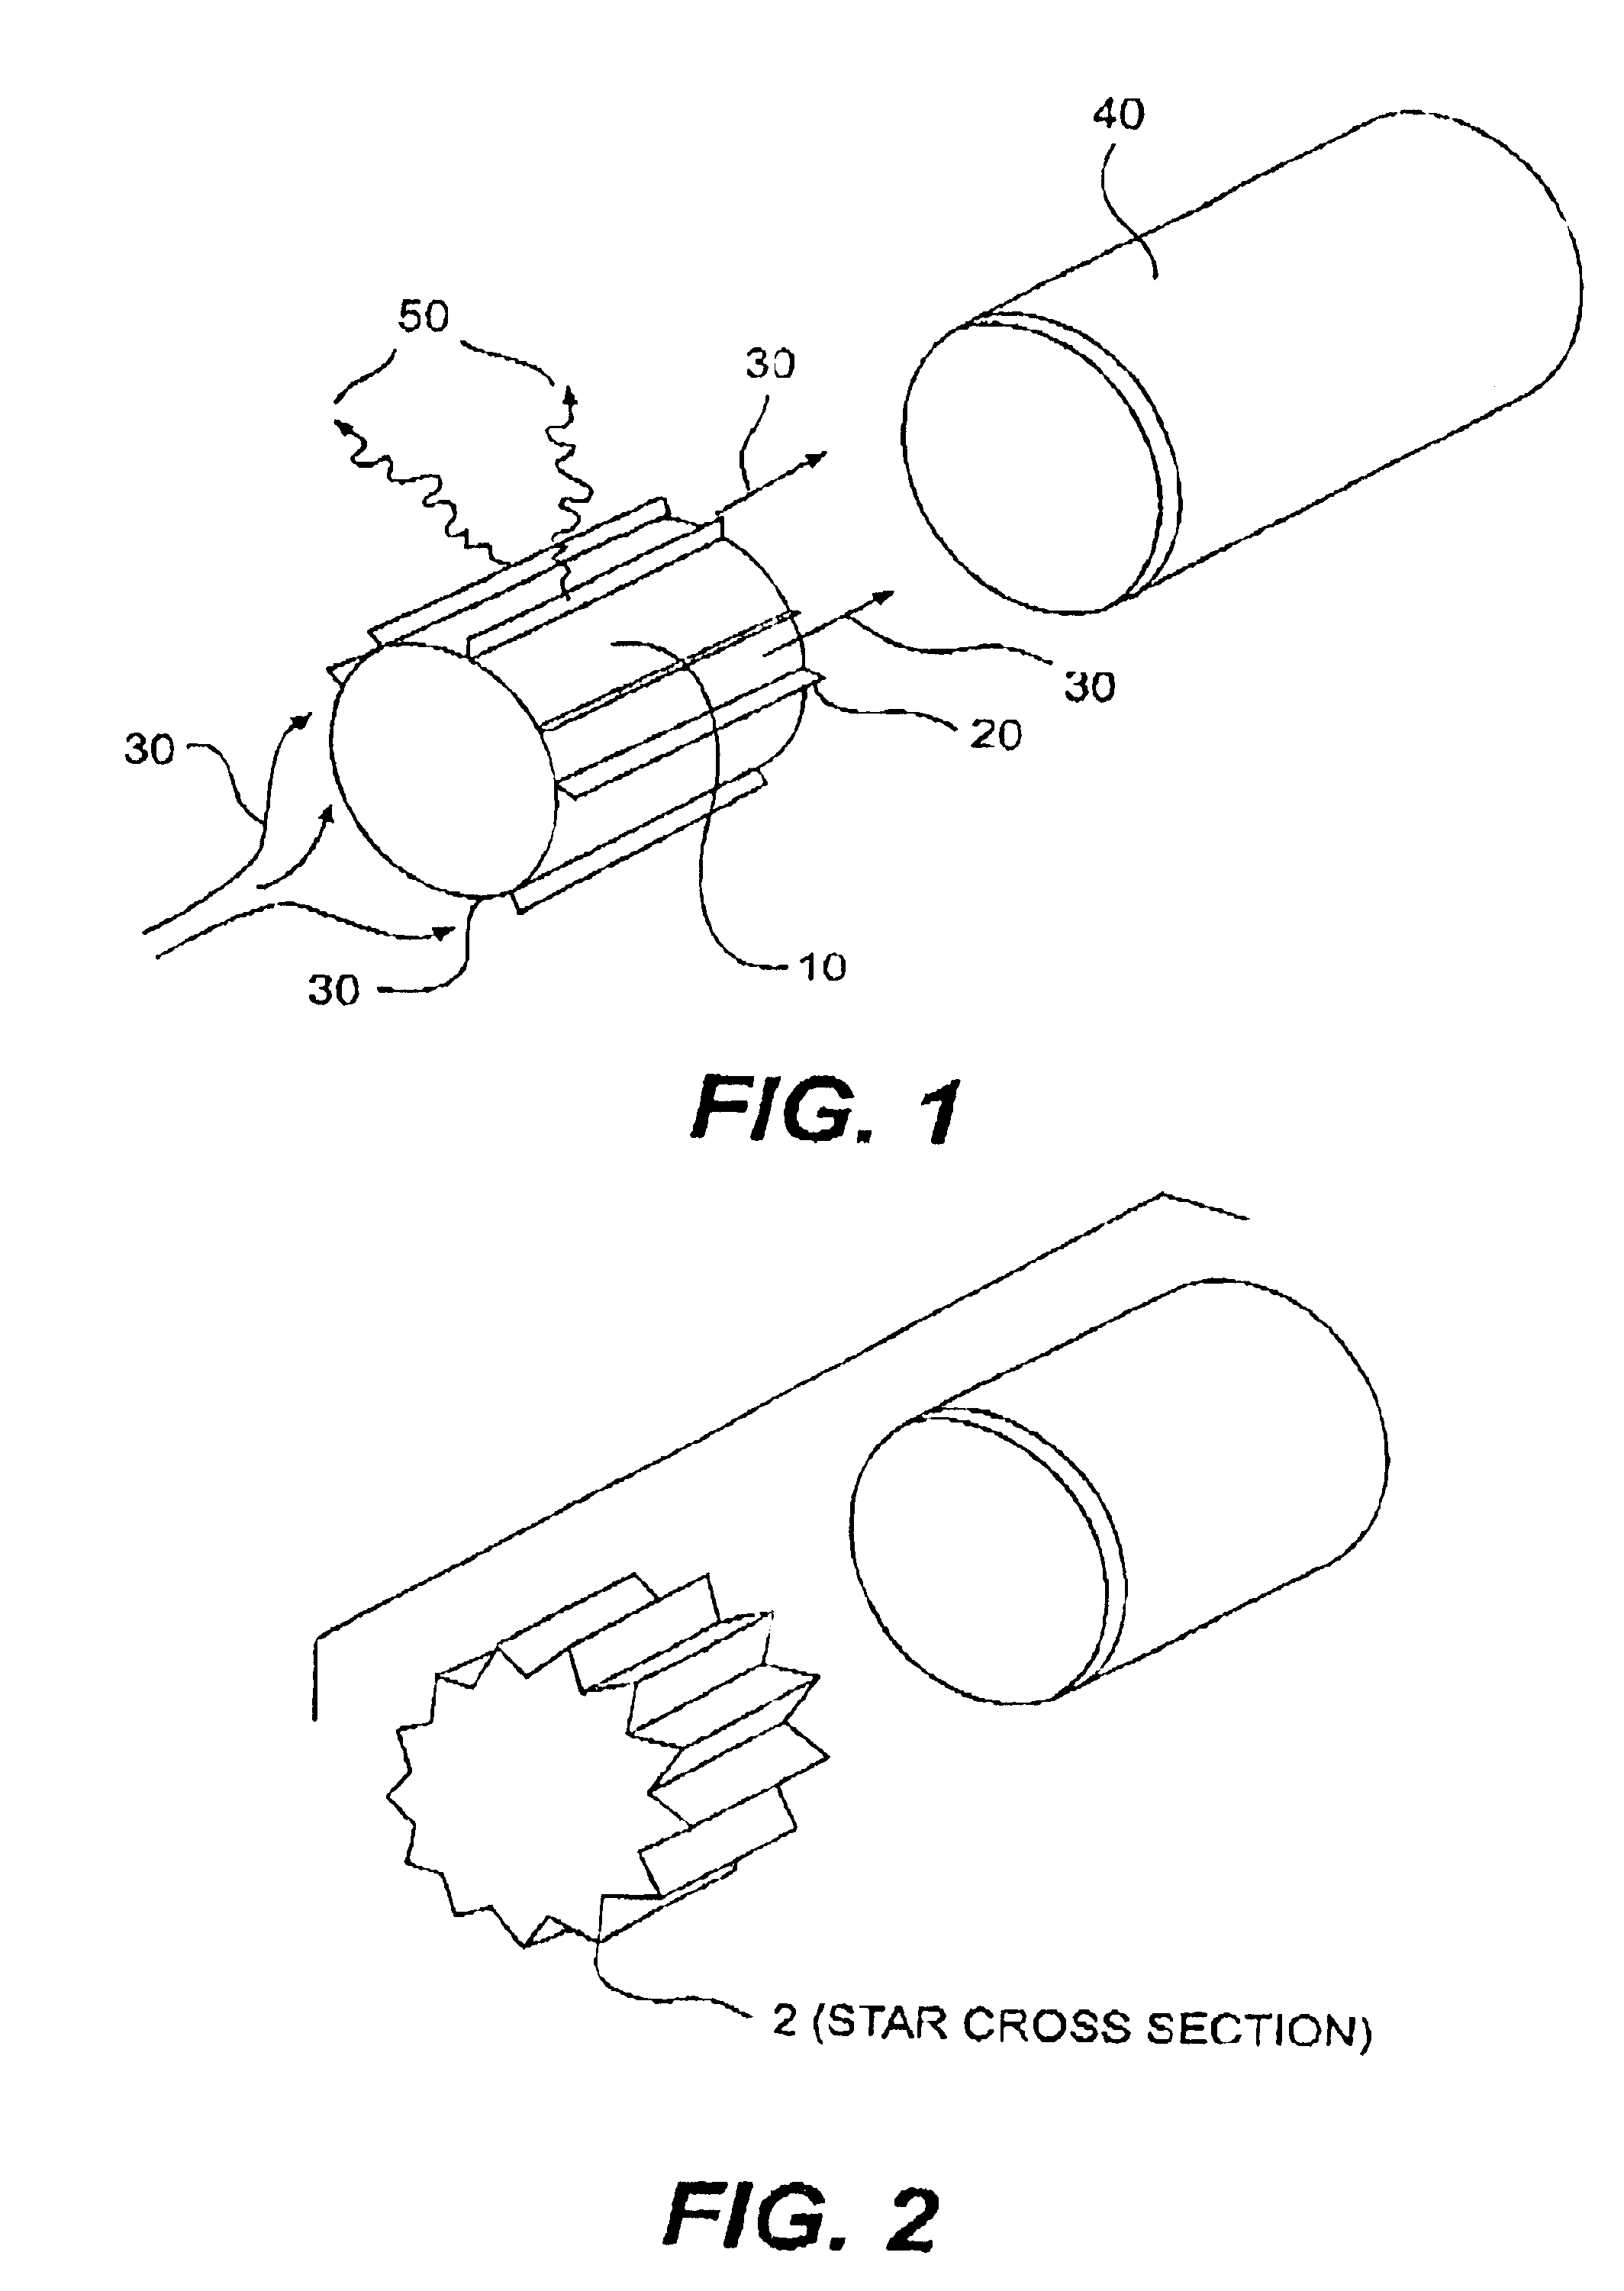 Method and apparatus to increase combustion efficiency and to reduce exhaust gas pollutants from combustion of a fuel